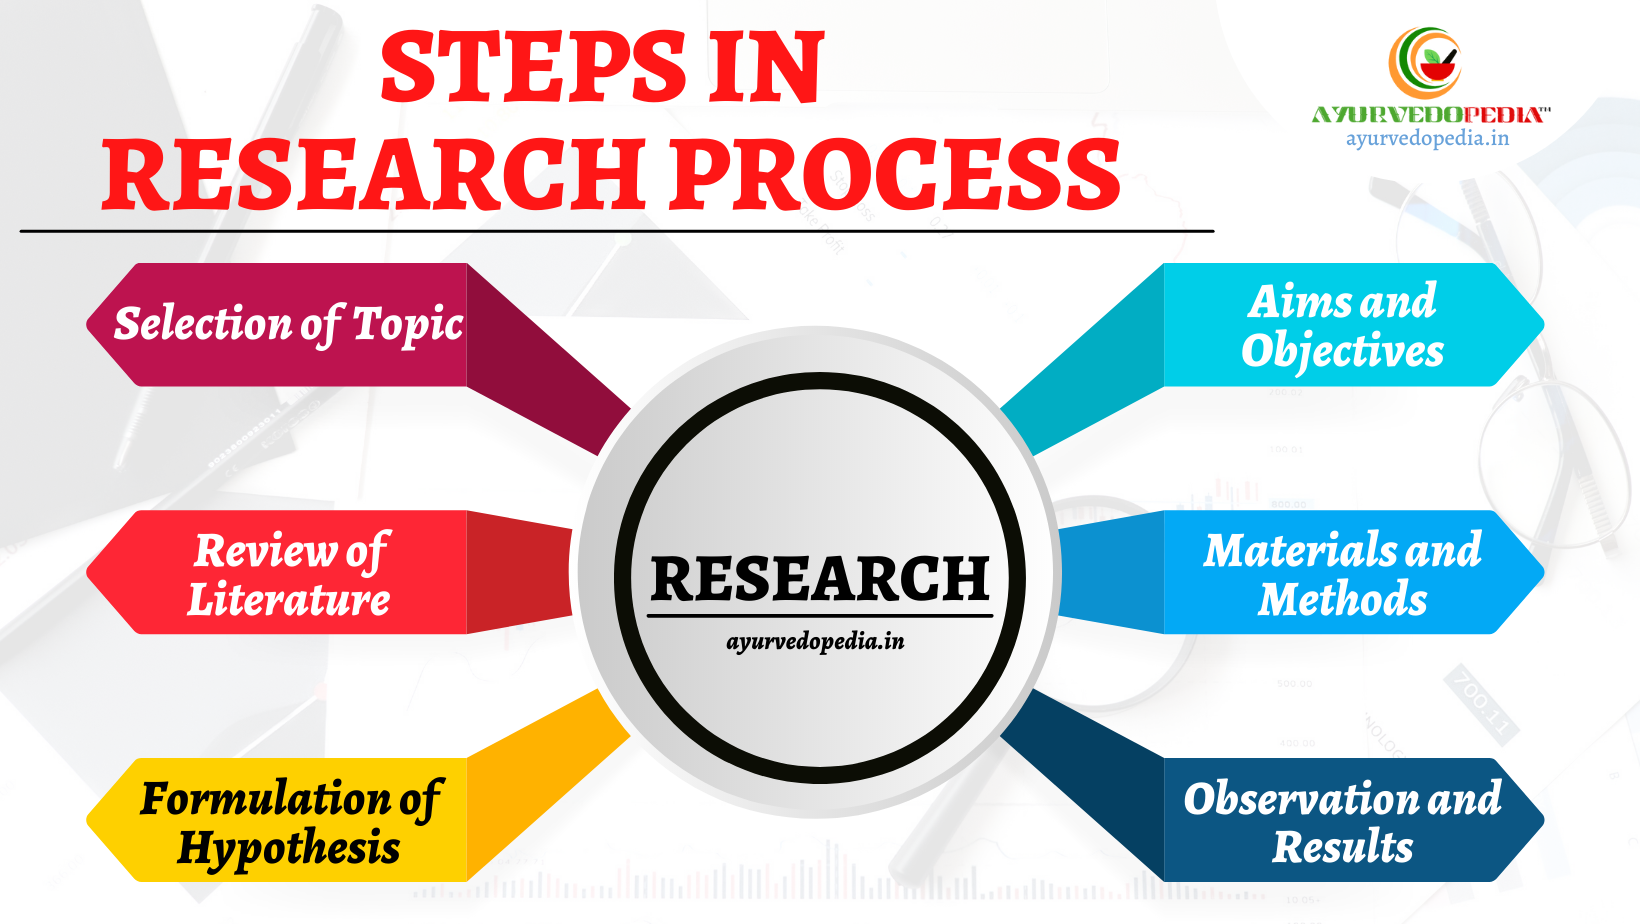 in research formulation of hypothesis is followed by